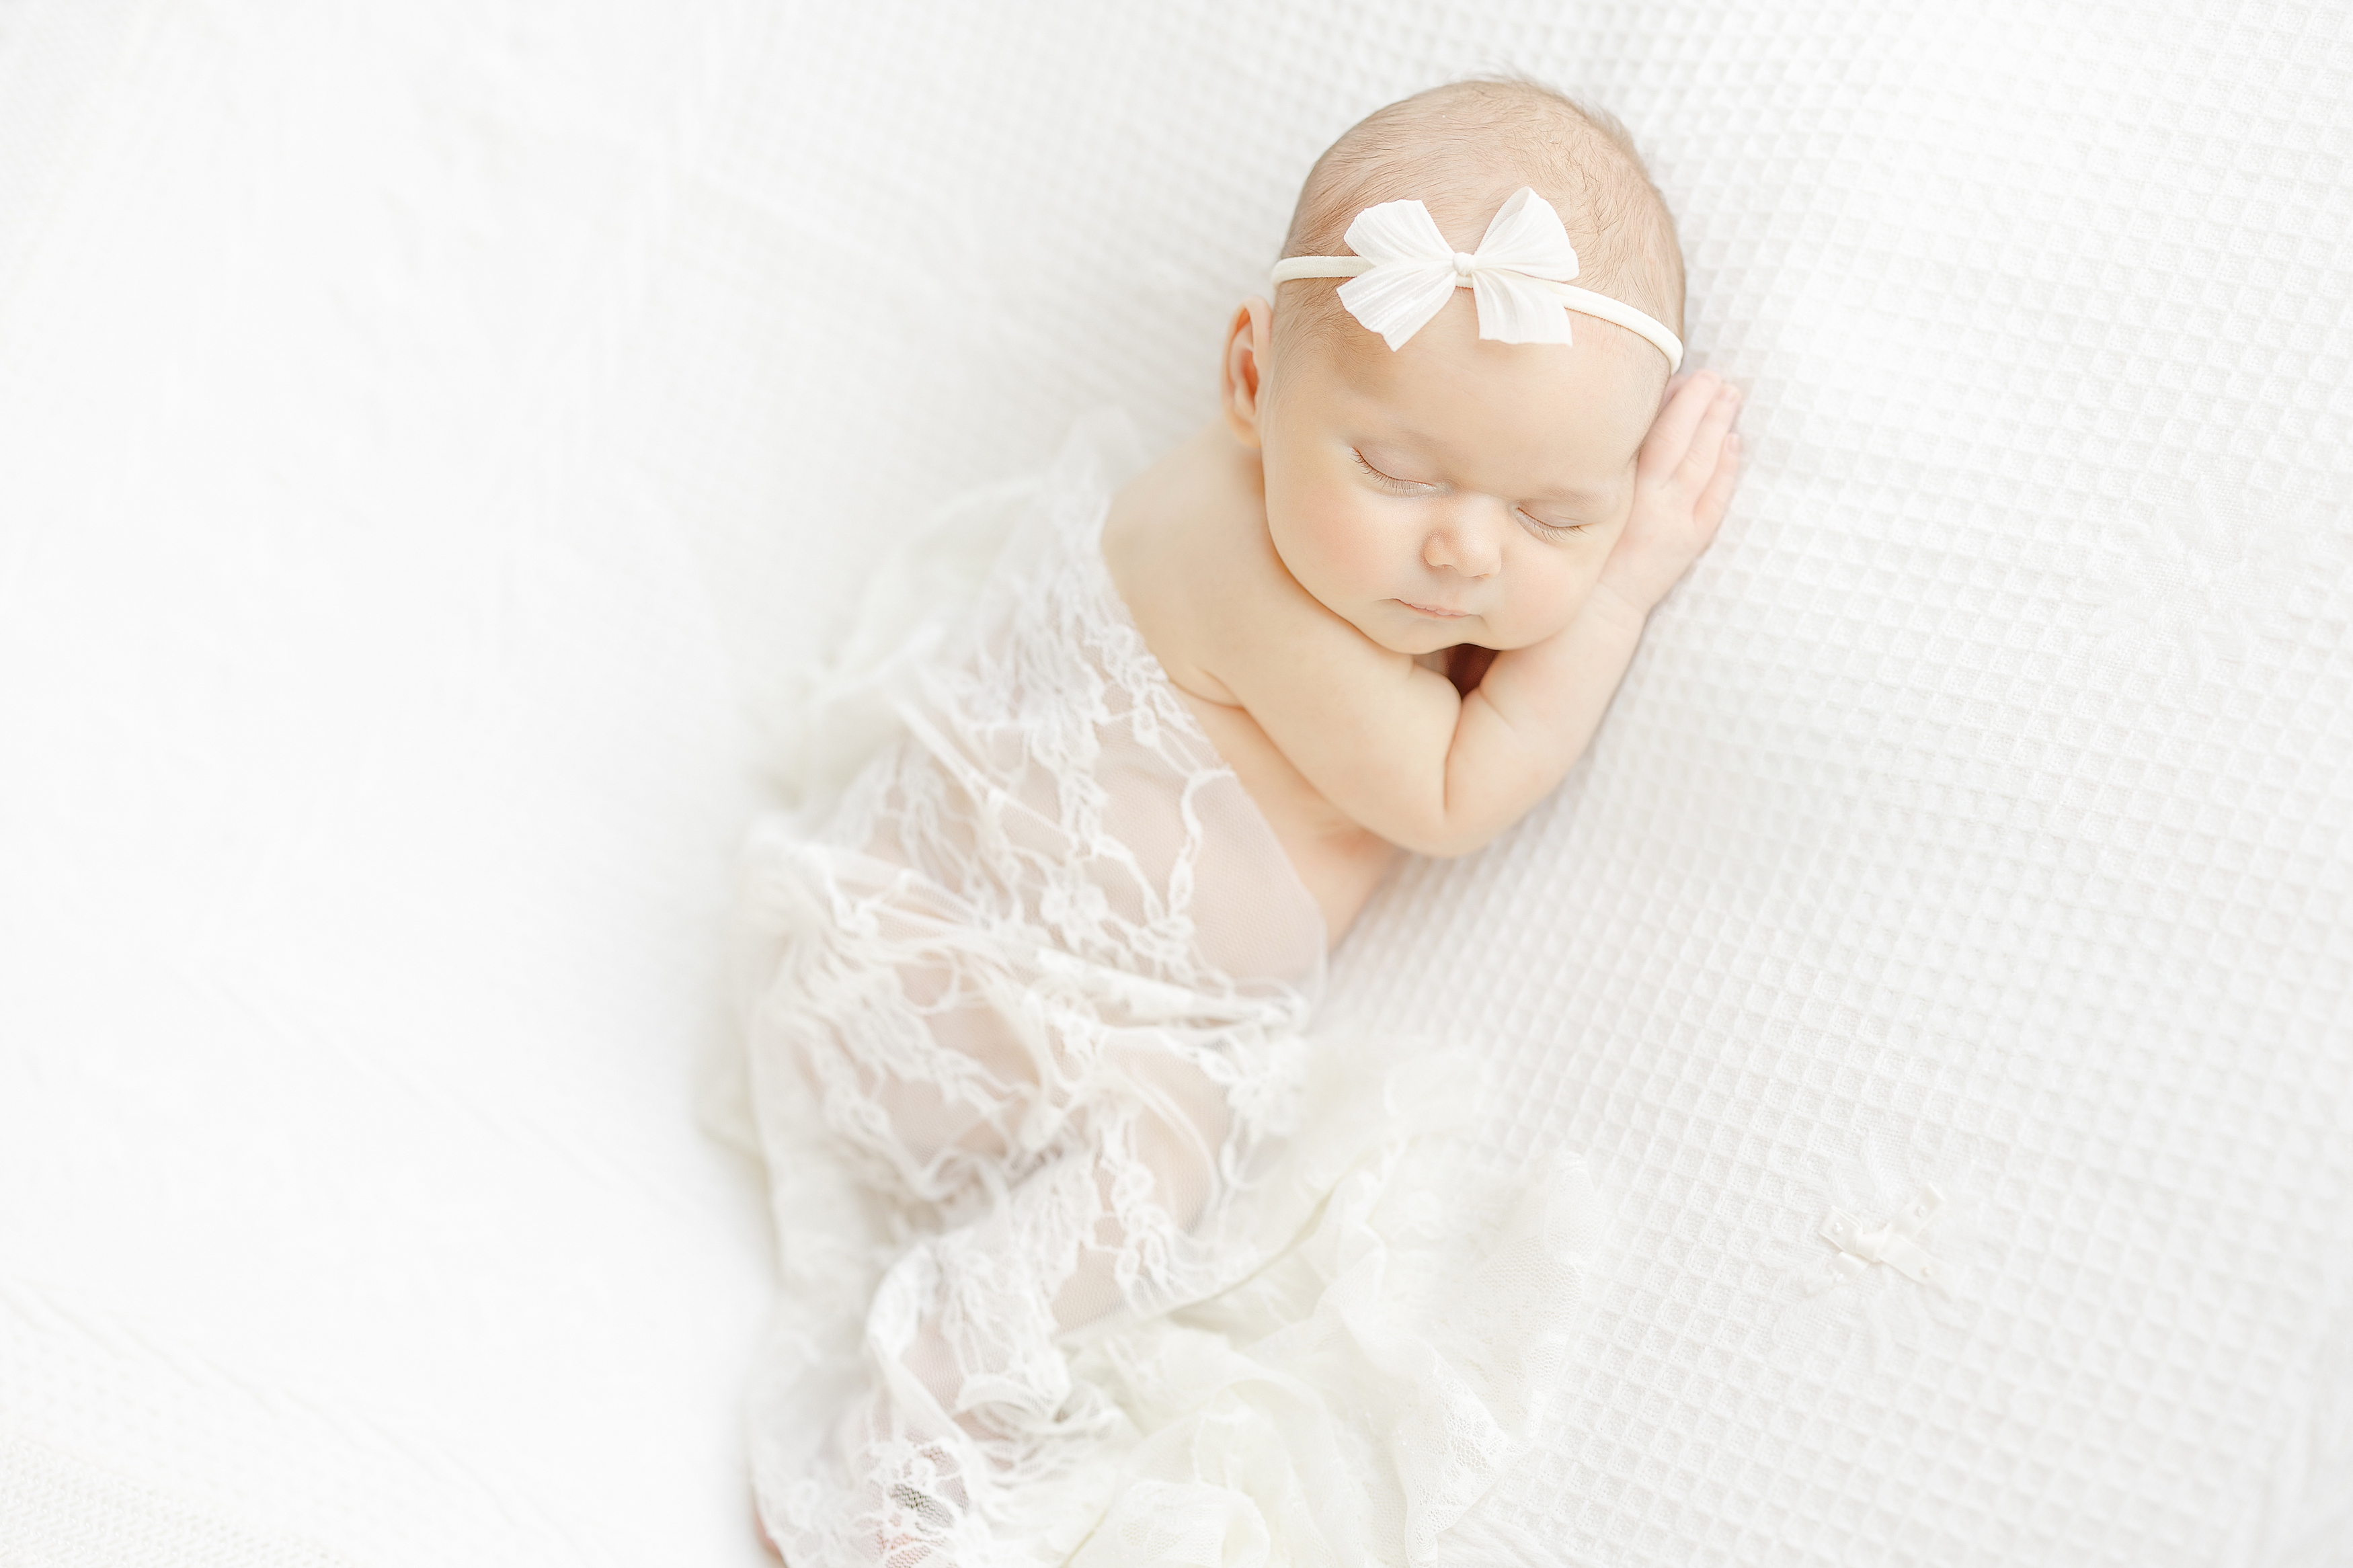 A light and airy newborn portrait of a baby girl in lace and cream blankets.